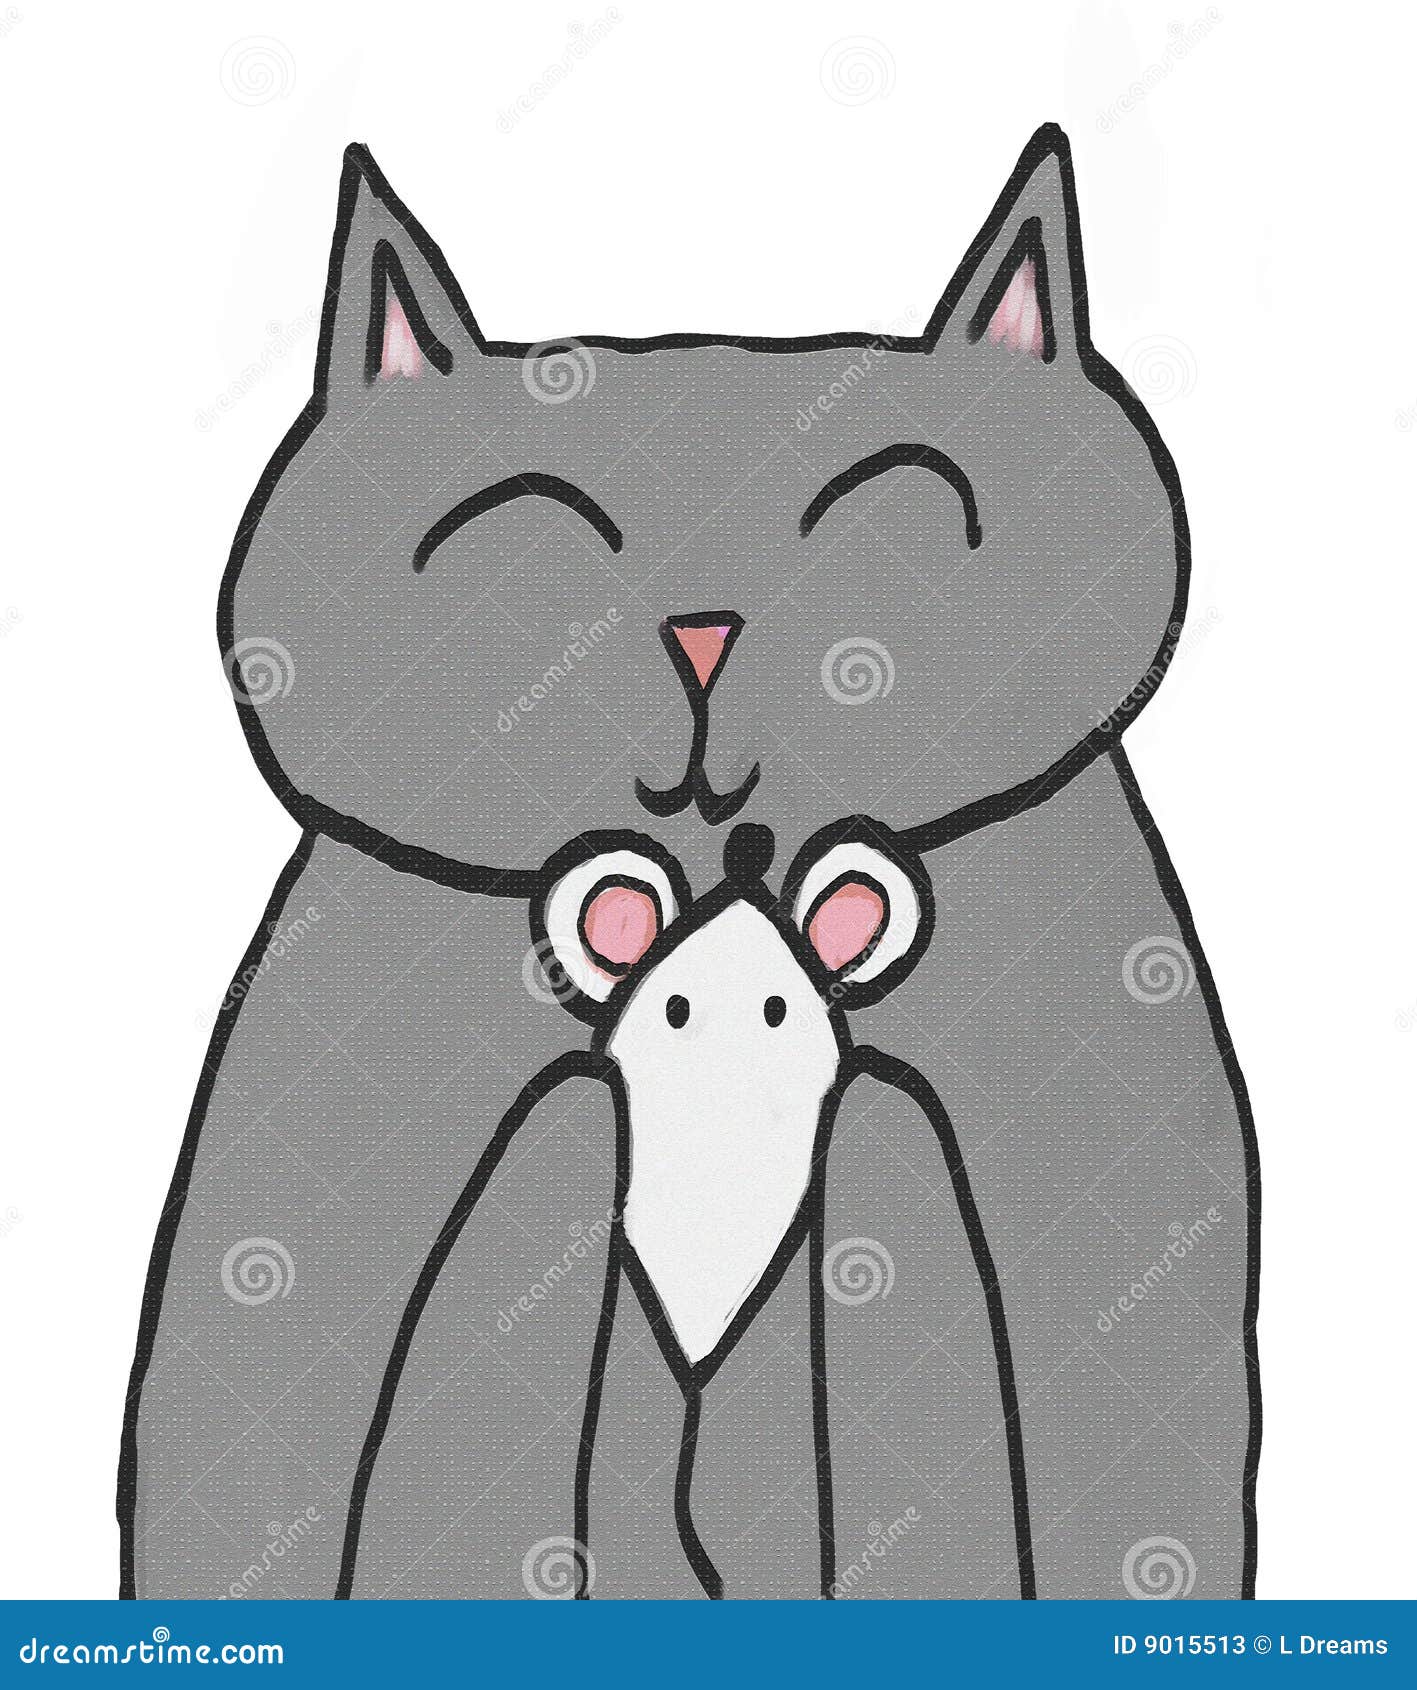 clipart cat and mouse - photo #15